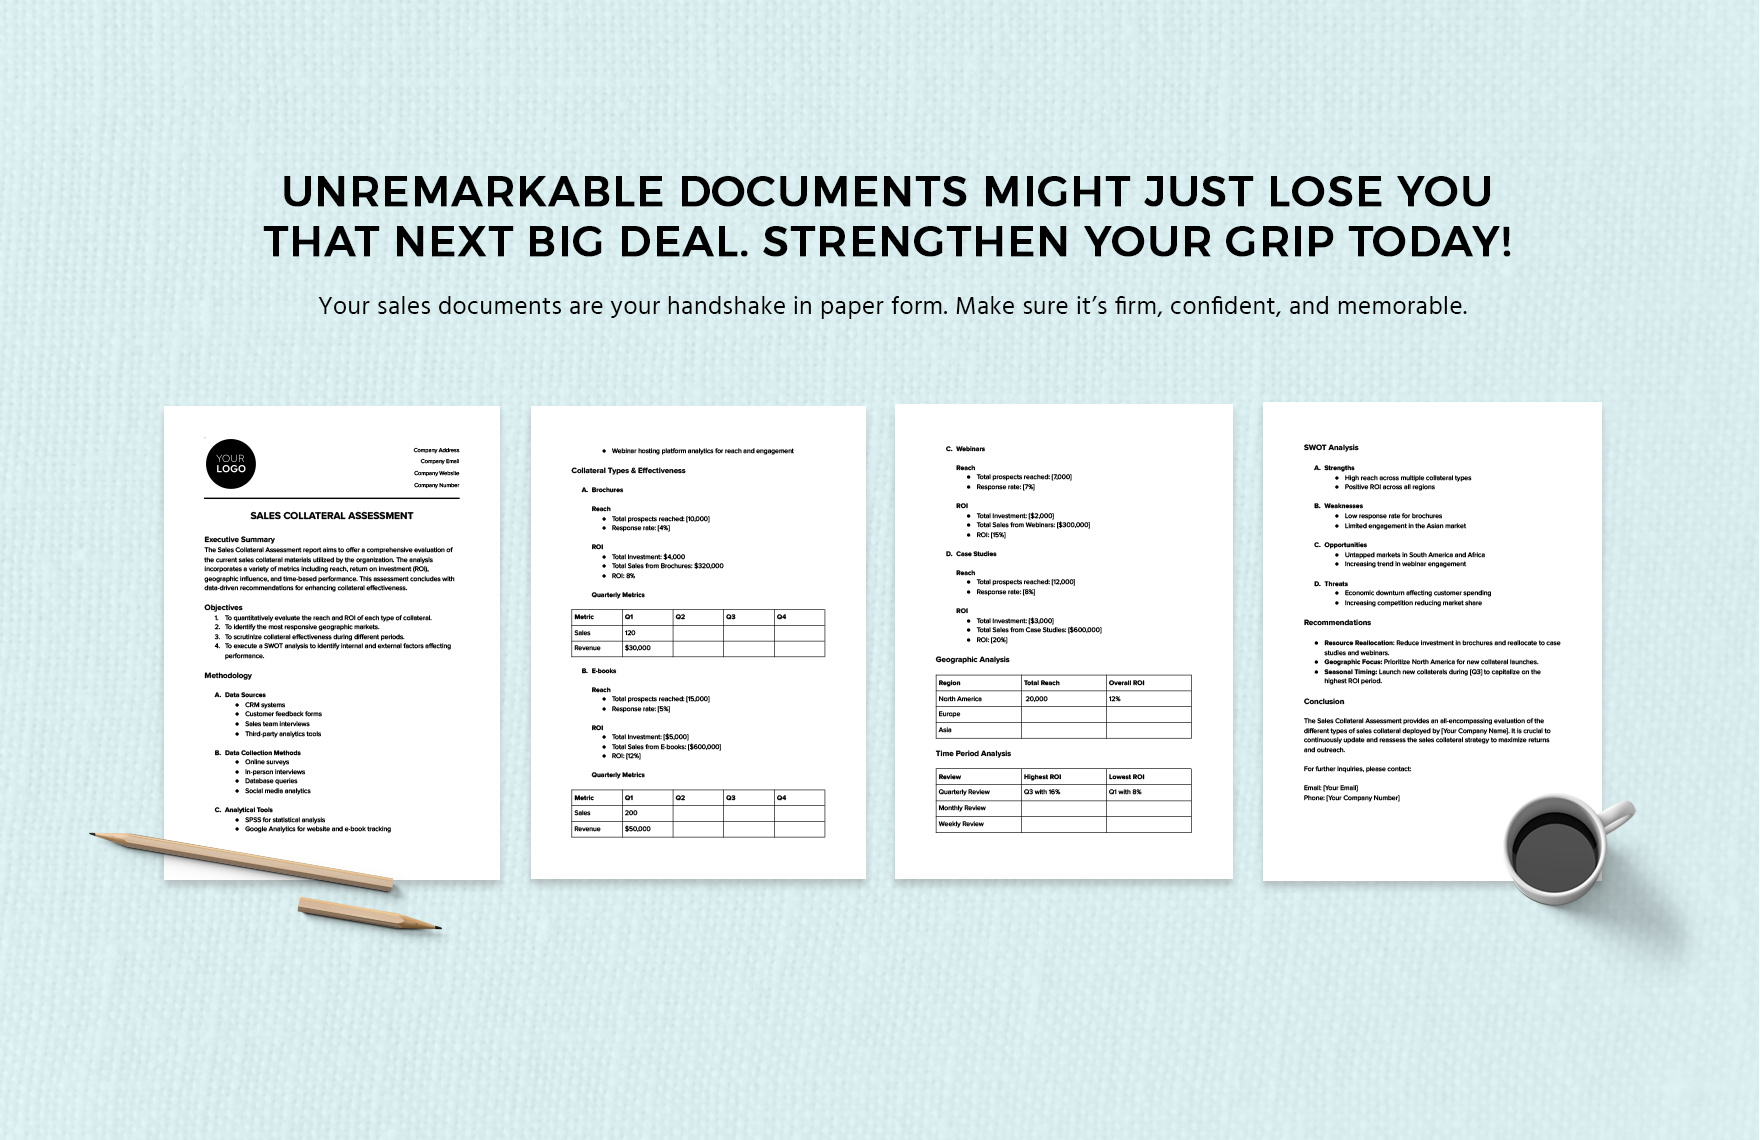 Sales Collateral Assessment Template